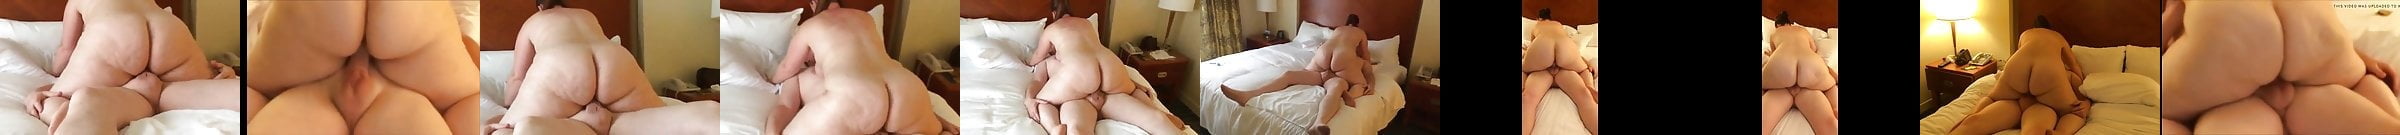 My Pawg Wife Riding Her Internet Friend In Atl Hd Porn 3c